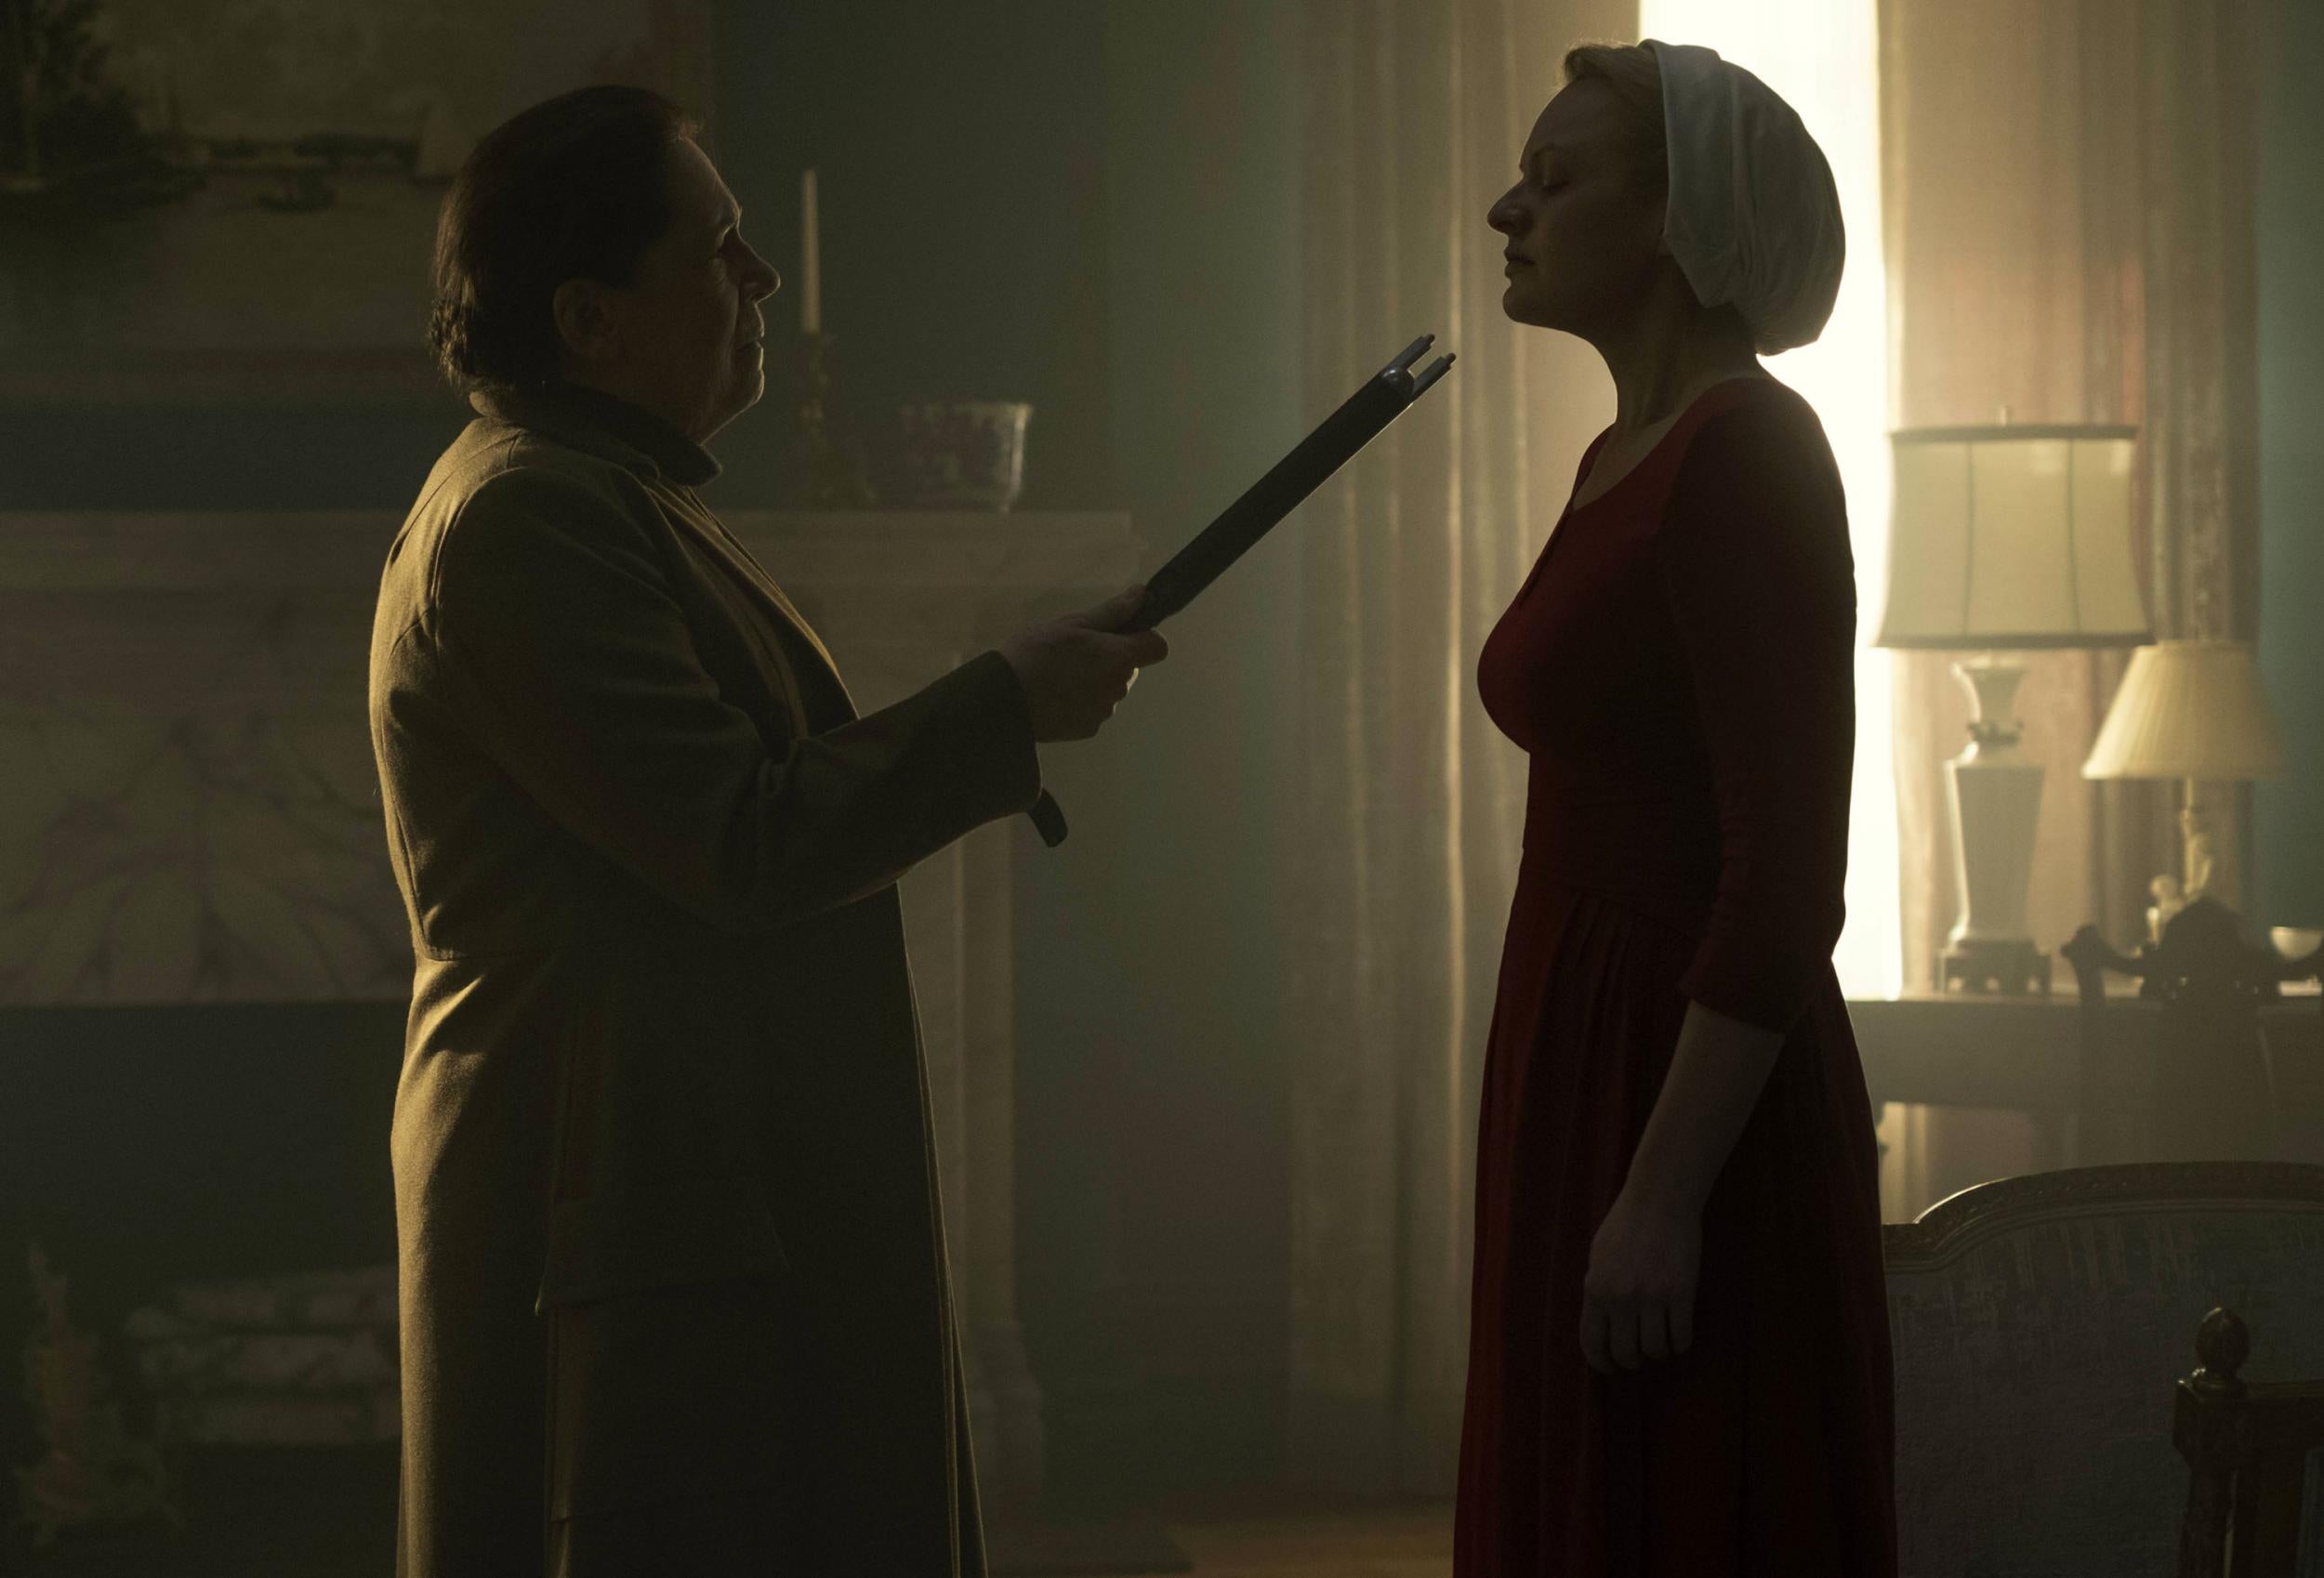 Ann Dowd and Elisabeth Moss as Aunt Lydia and Offred in ‘The Handmaid’s Tale’ (Hulu